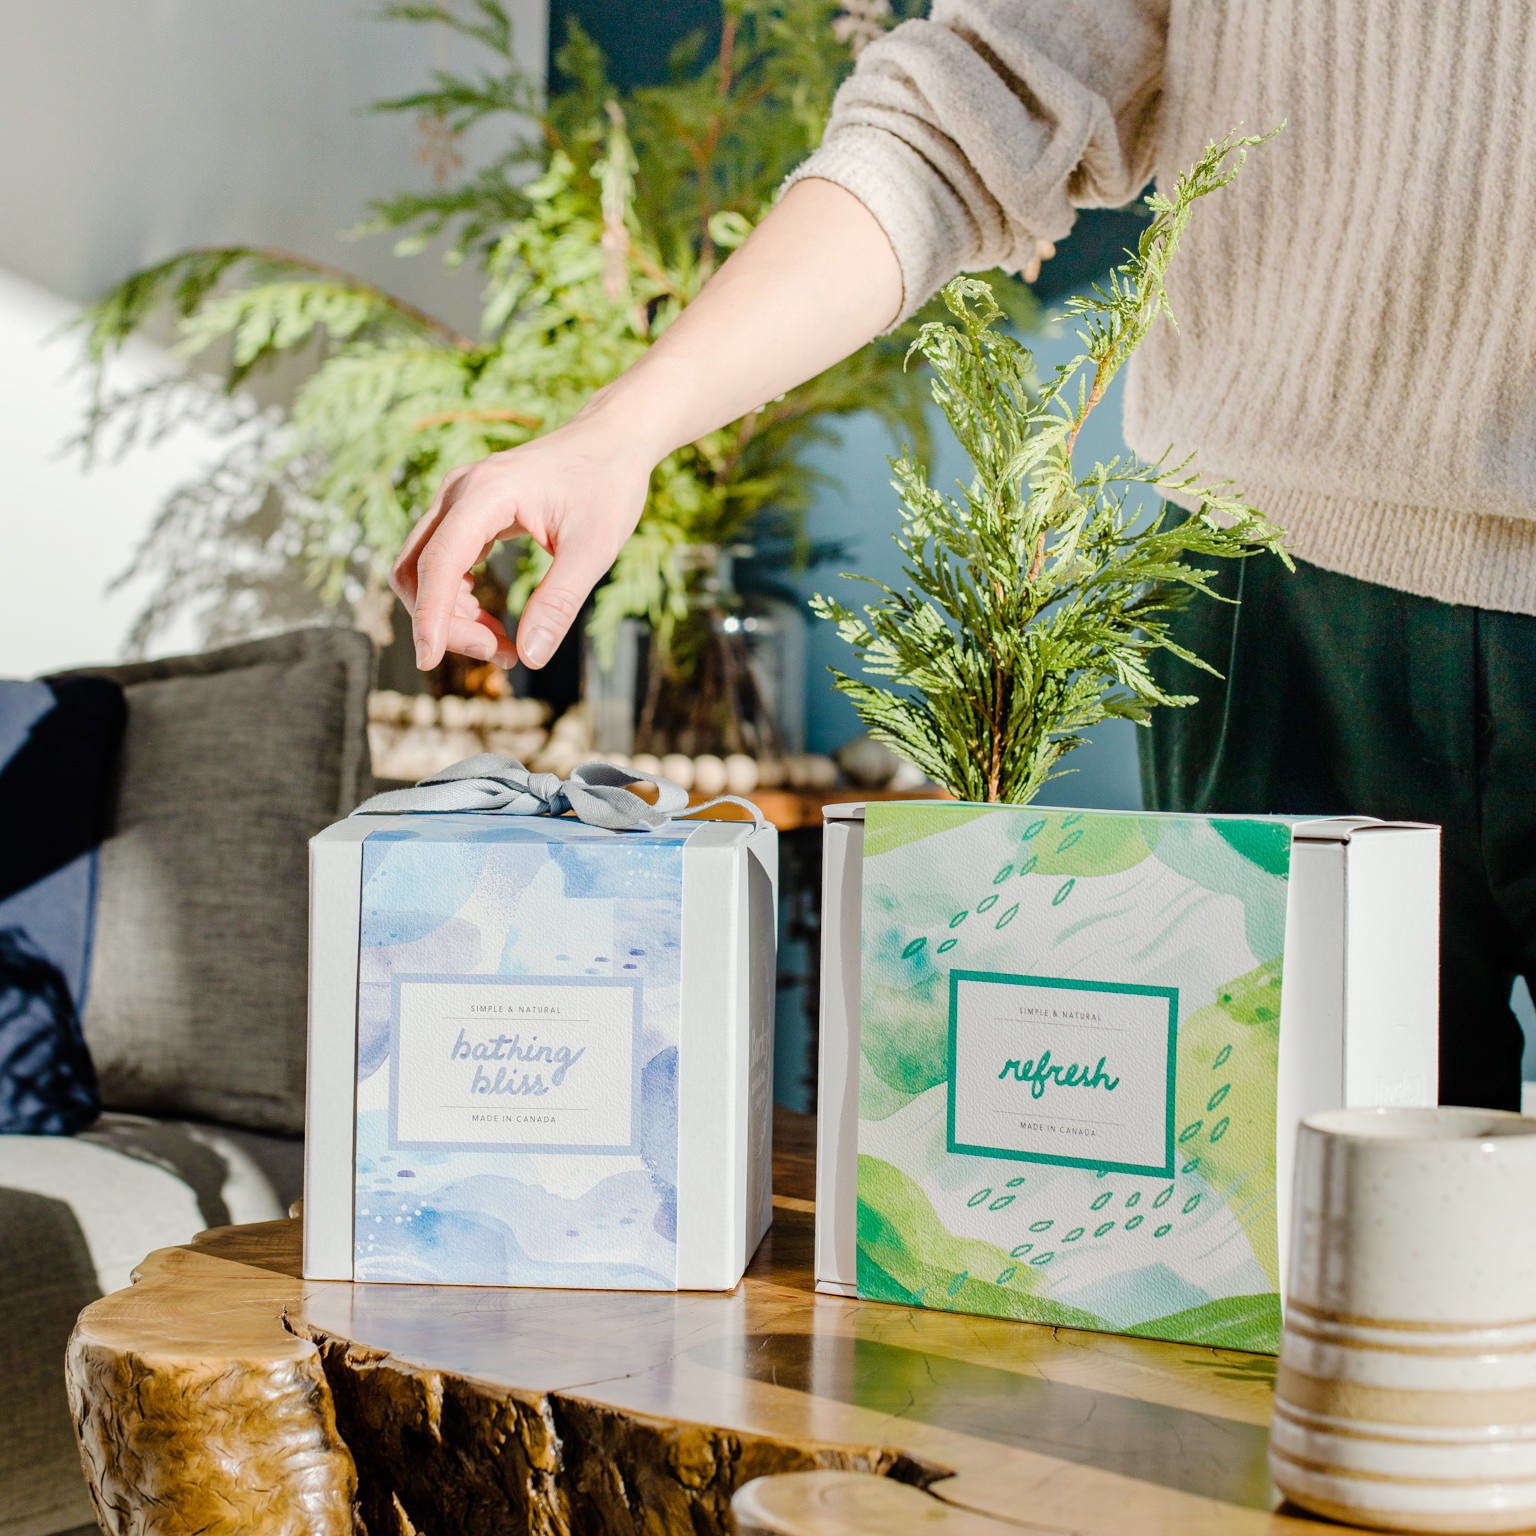 All-natural, made in Canada gift sets from Rocky Mountain Soap Company placed on a table as part of a holiday gift exchange like Secret Santa, White Elephant, or Draw Names. 